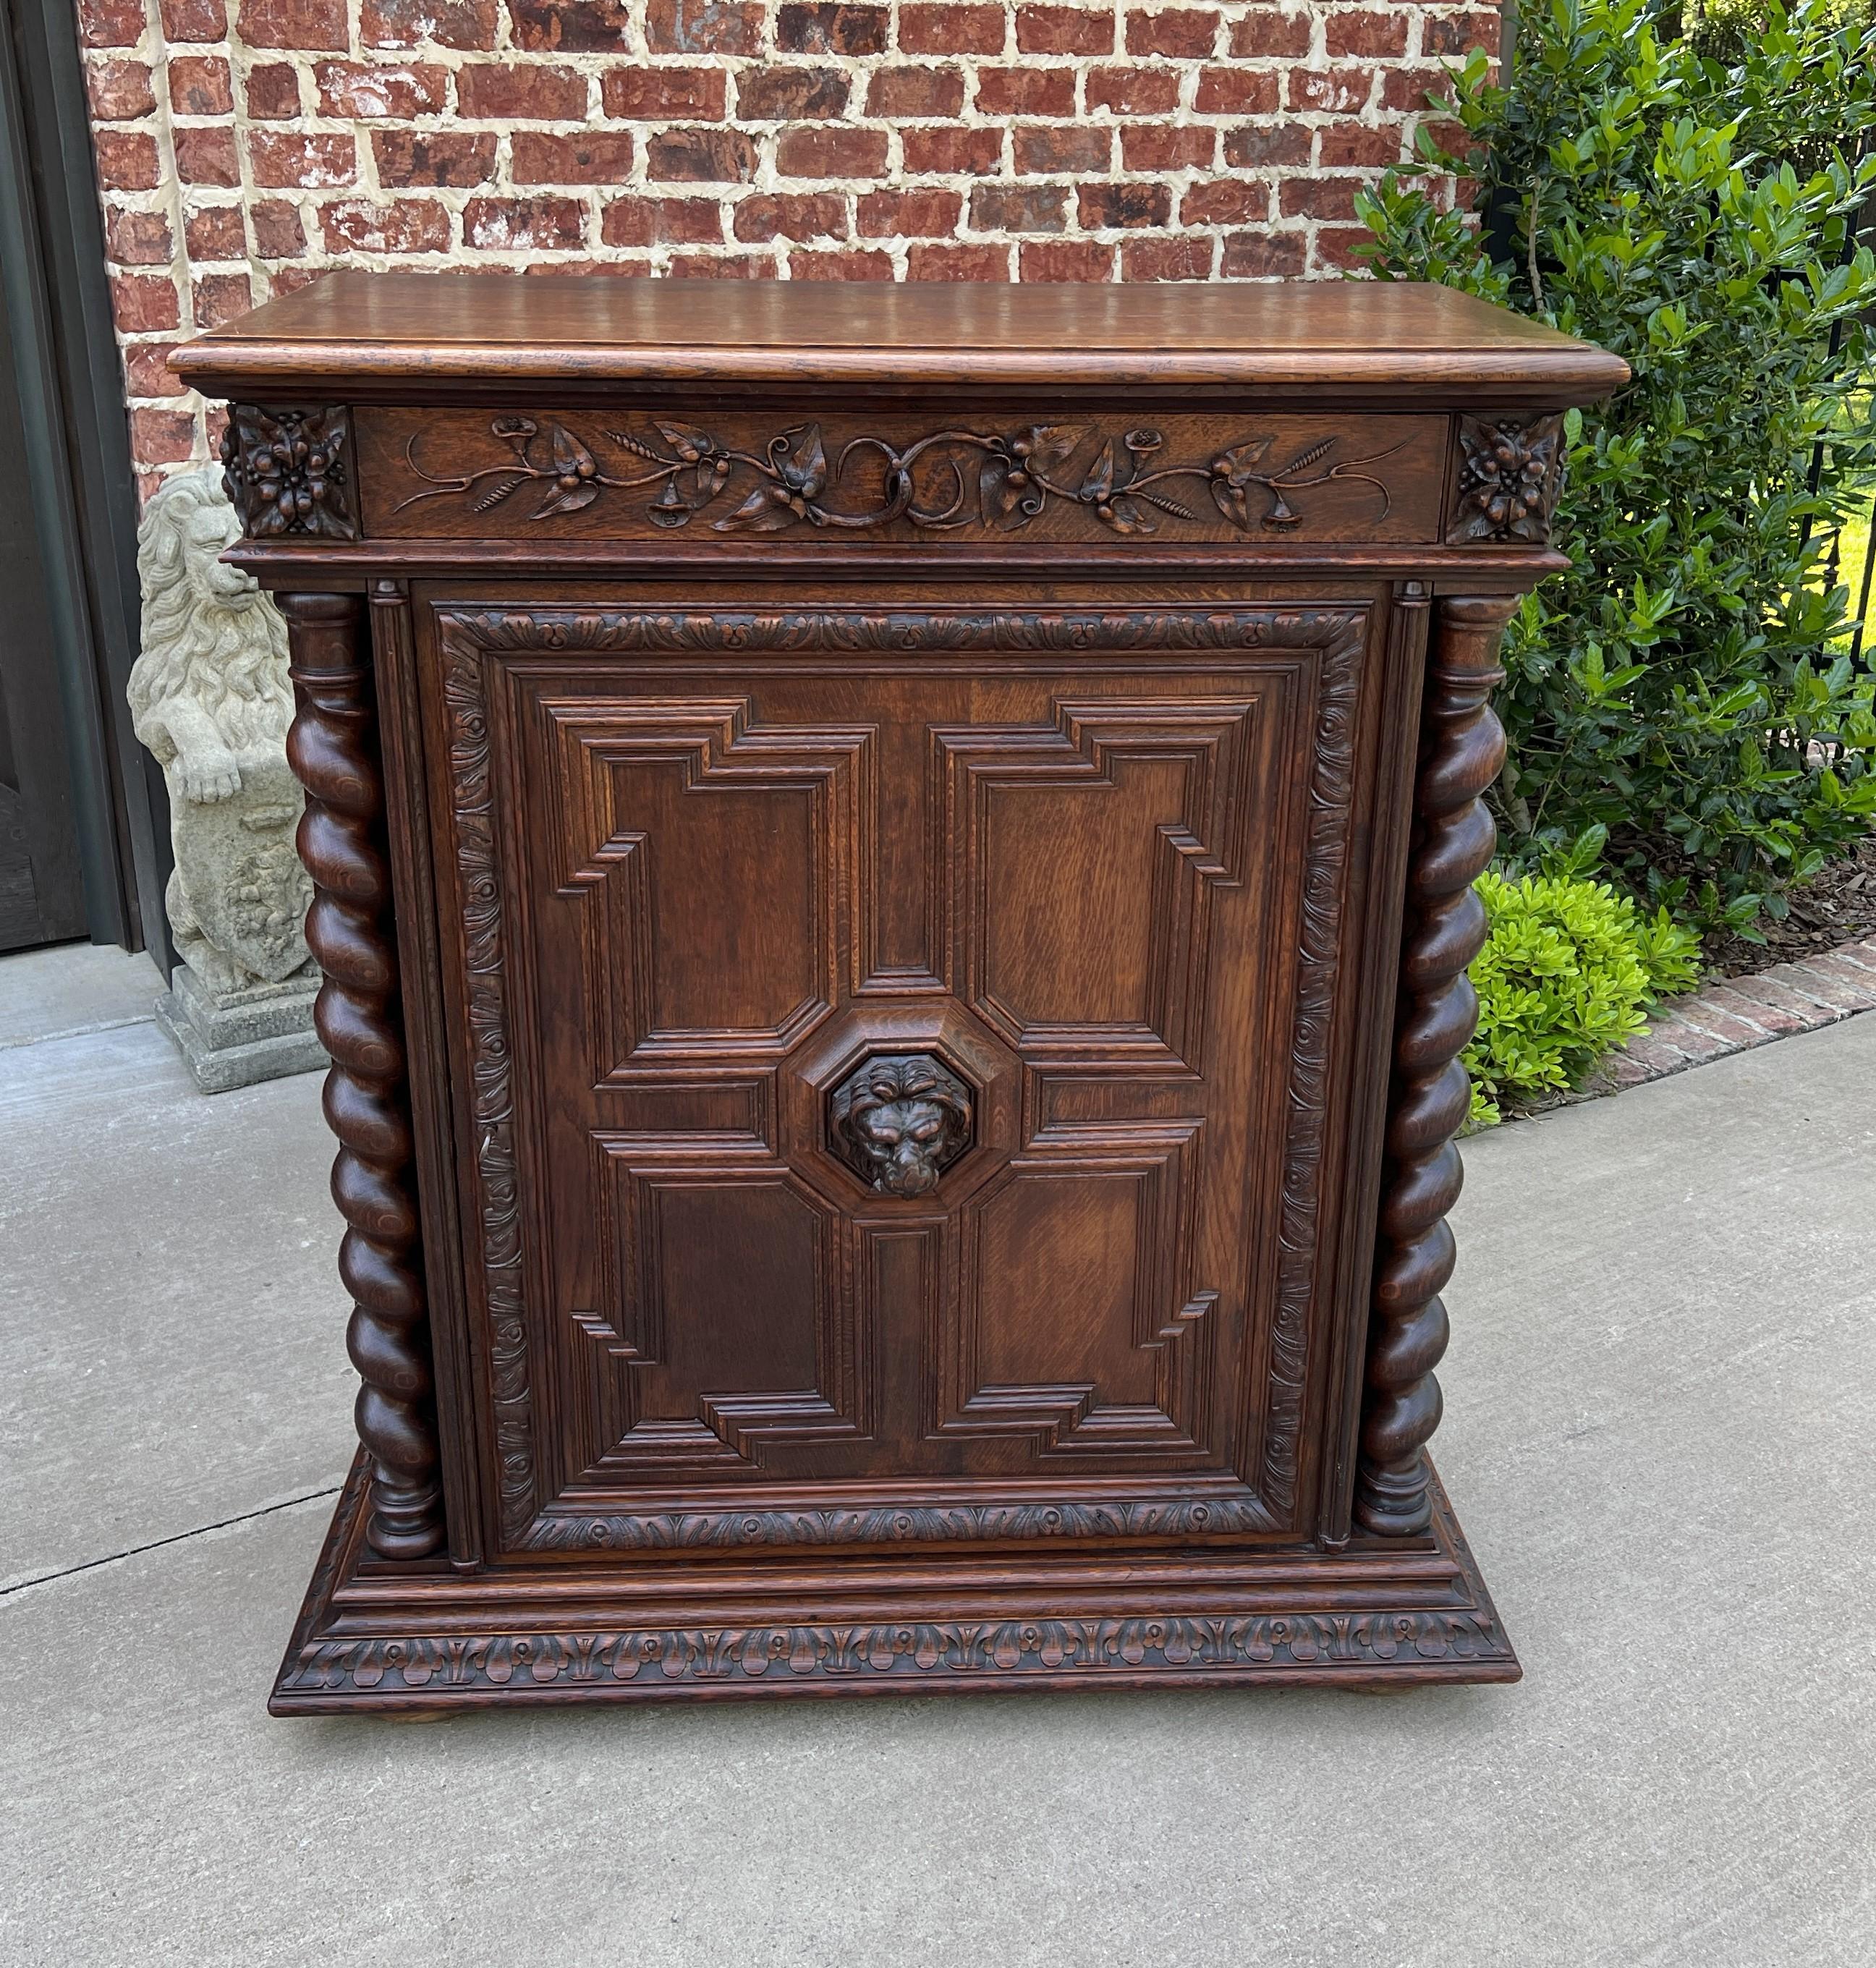 CHARMING Antique French BARLEY TWIST Oak Renaissance Revival Jam Cabinet with Drawer~~c. 1890s 

Perfect statement piece that can accommodate any number of storage needs in today's home~~use in a bedroom or dressing area for clothing or